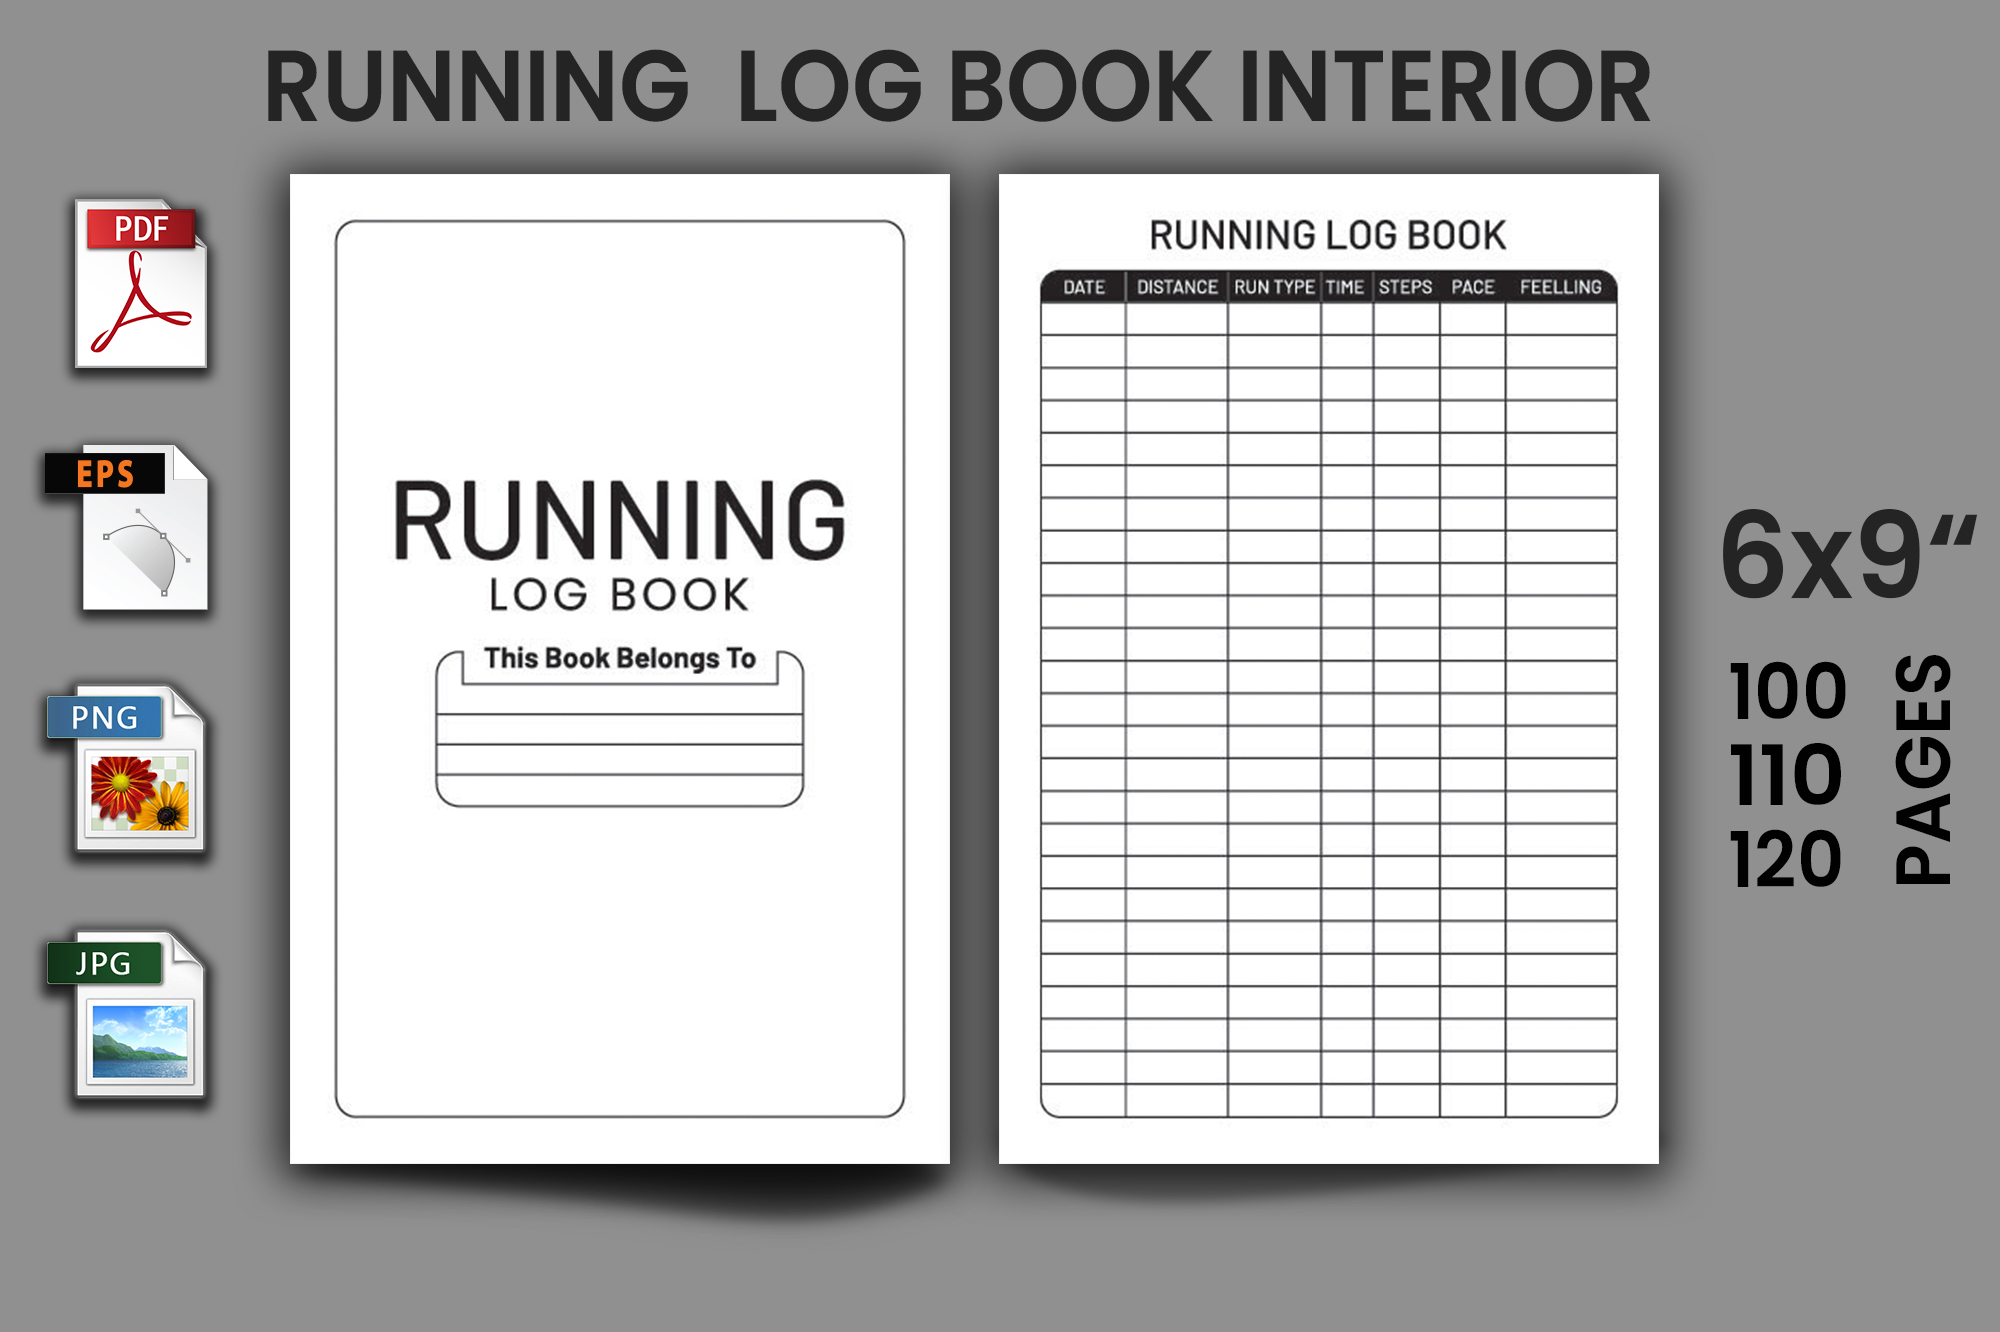 Running log book is shown with the text running log book.